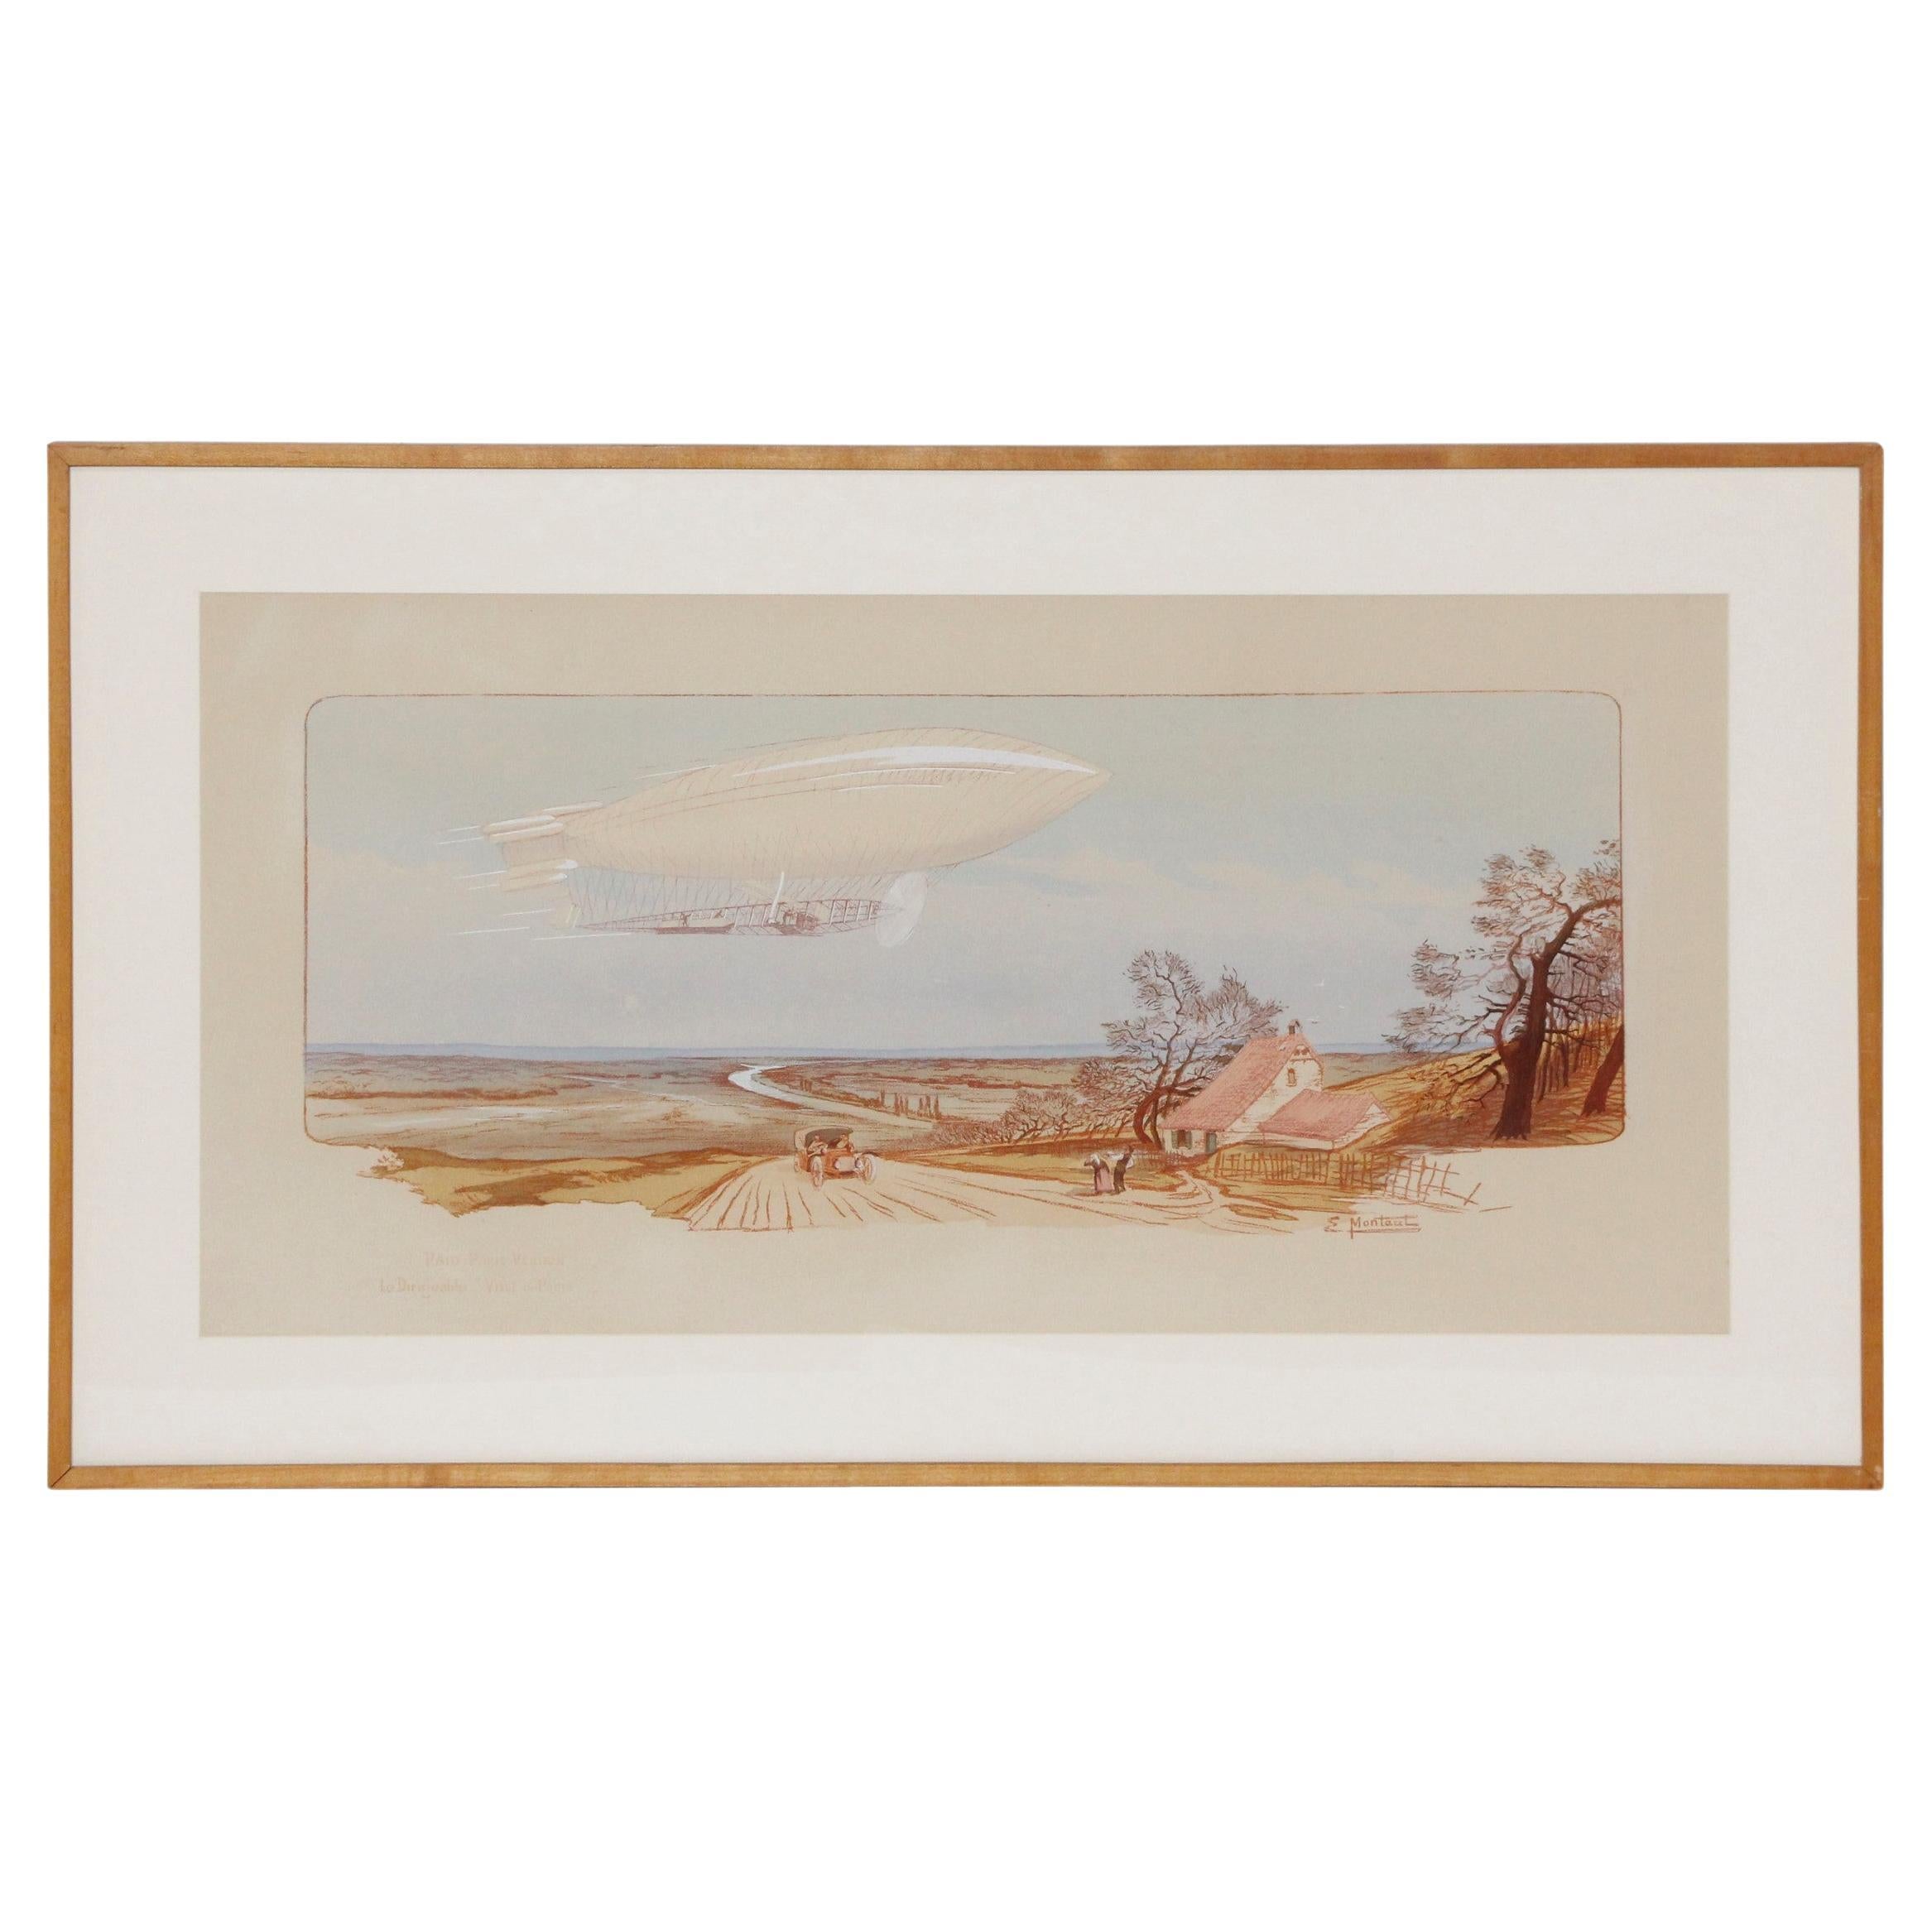 Sighting Zeppelin Matted Framed French Lithograph Signed E(arnest) Montaut